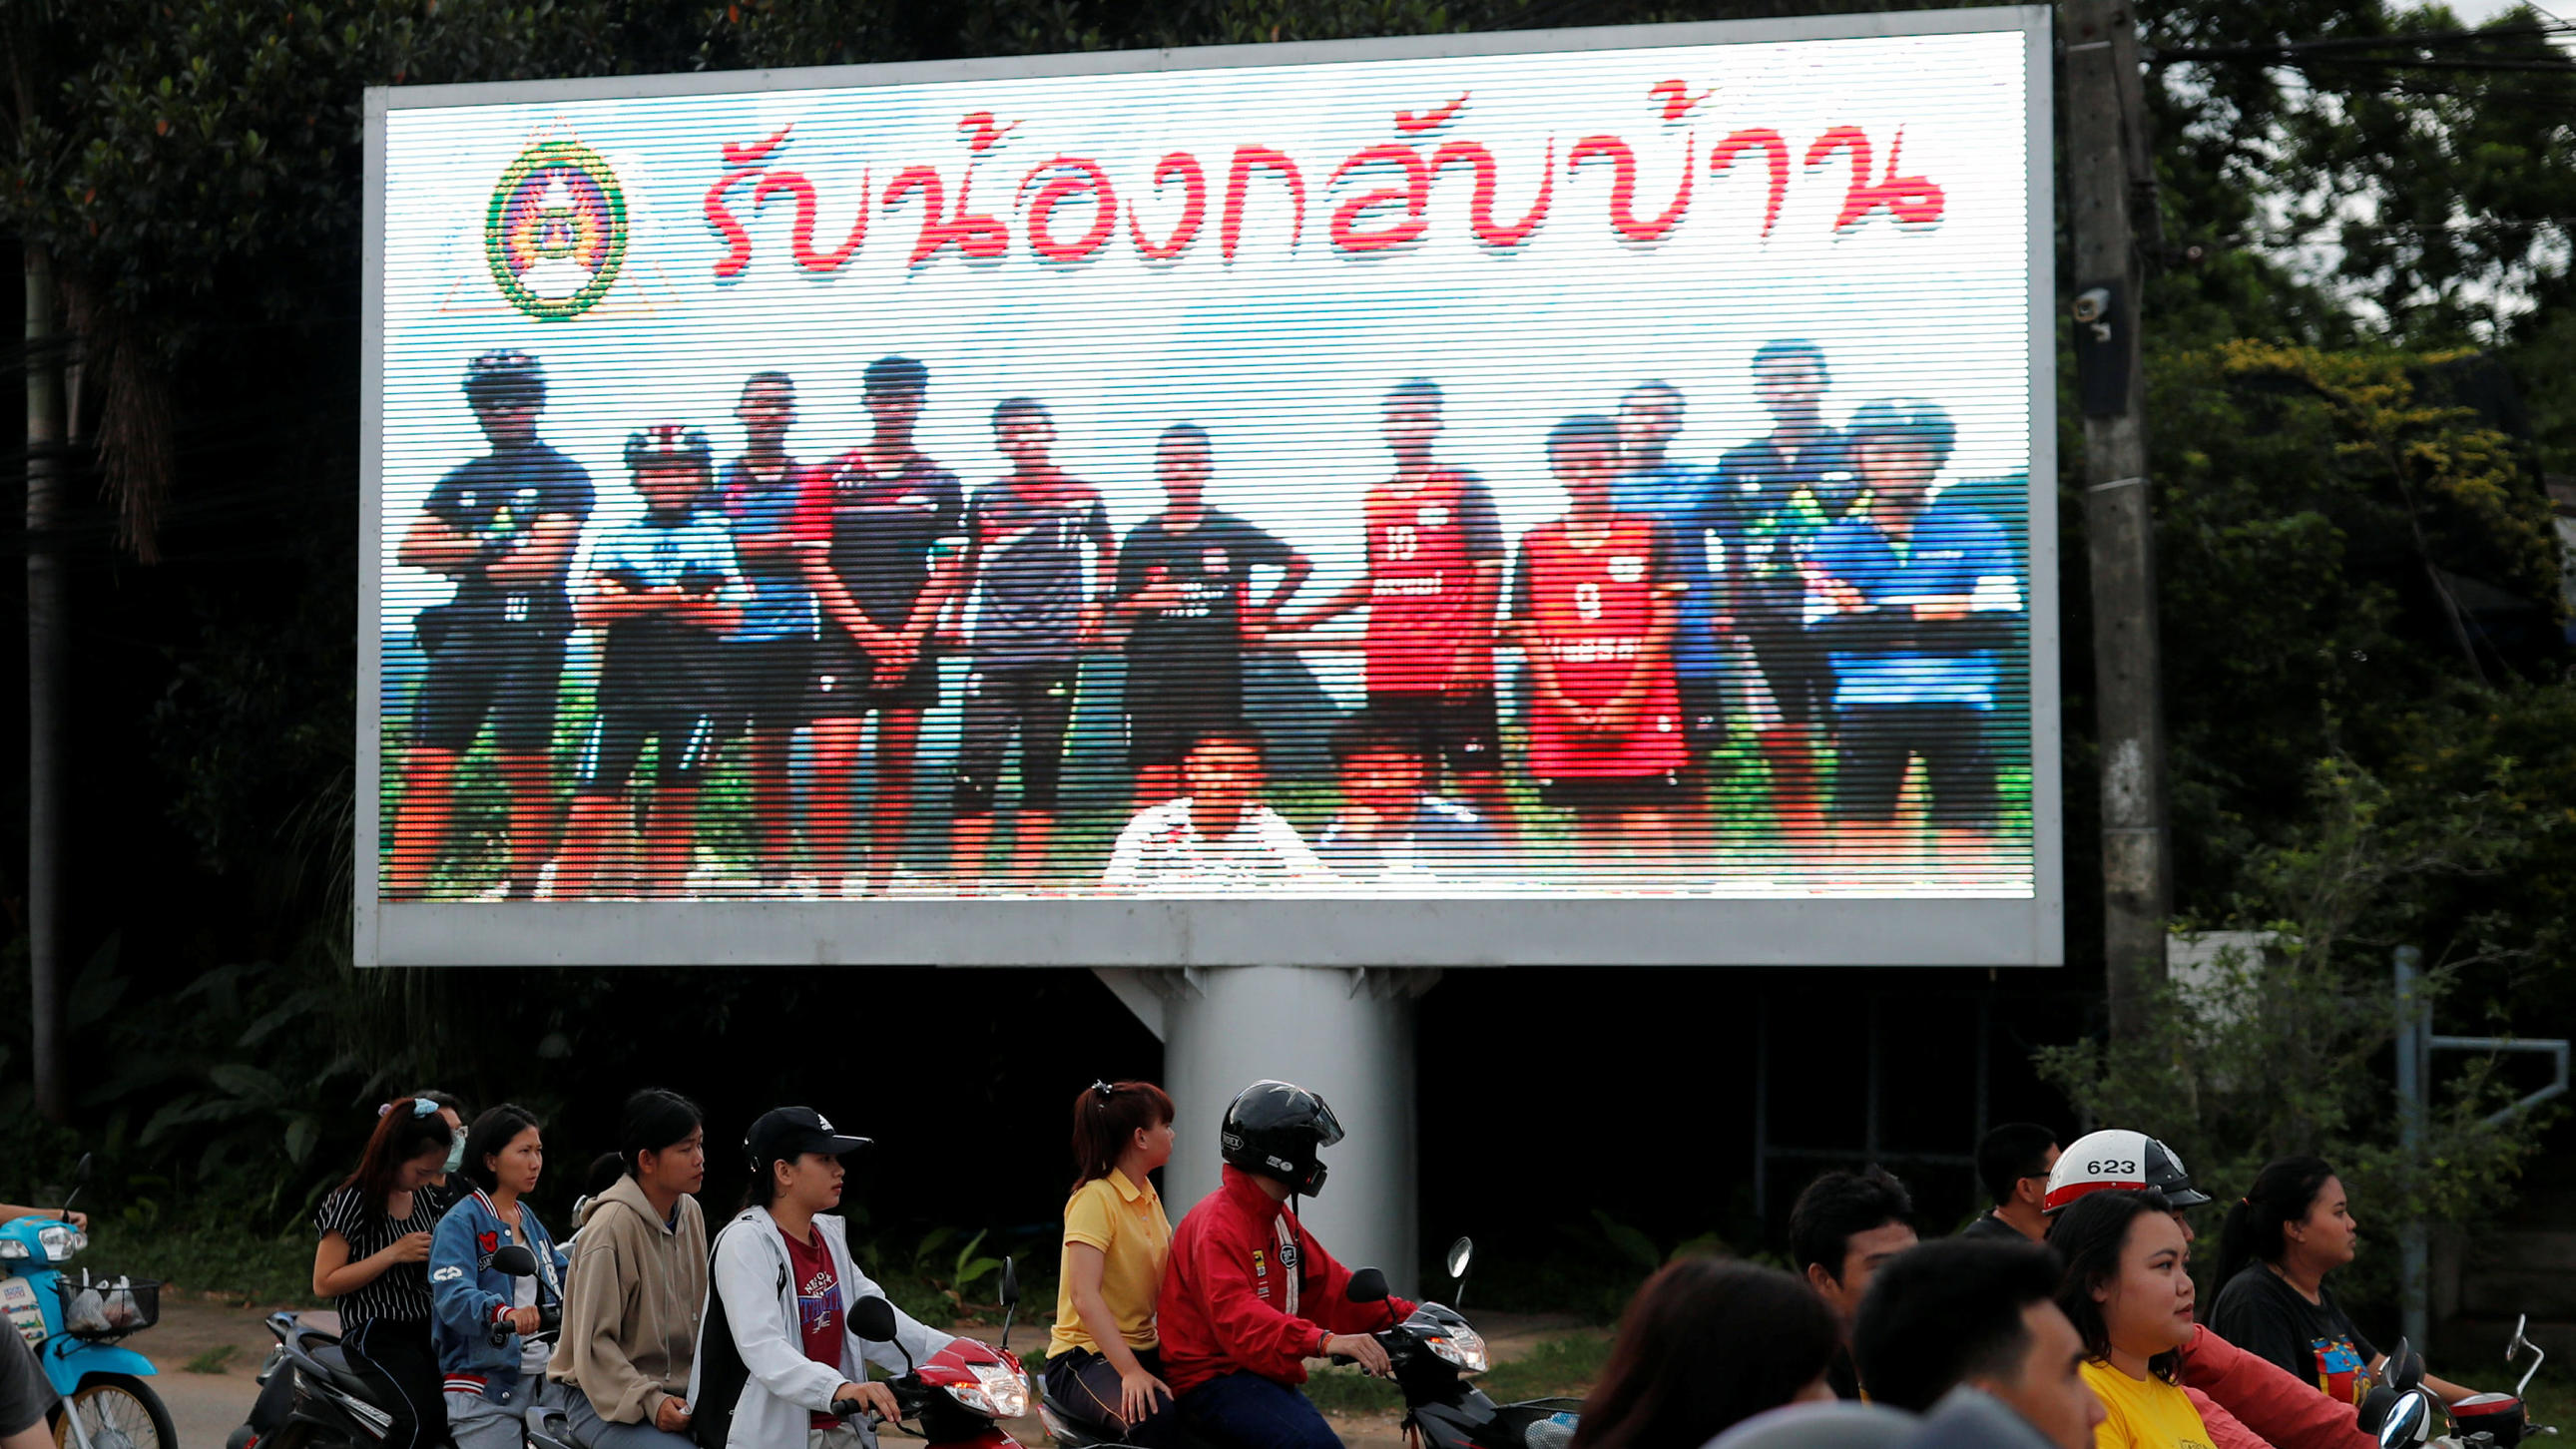 A board showing "Welcome home, boys", is seen after rescue effort has begun for the 12 schoolboys and their soccer coach trapped in Tham Luang cave, in Chiang Rai, Thailand, July 9, 2018. REUTERS/Tyrone Siu